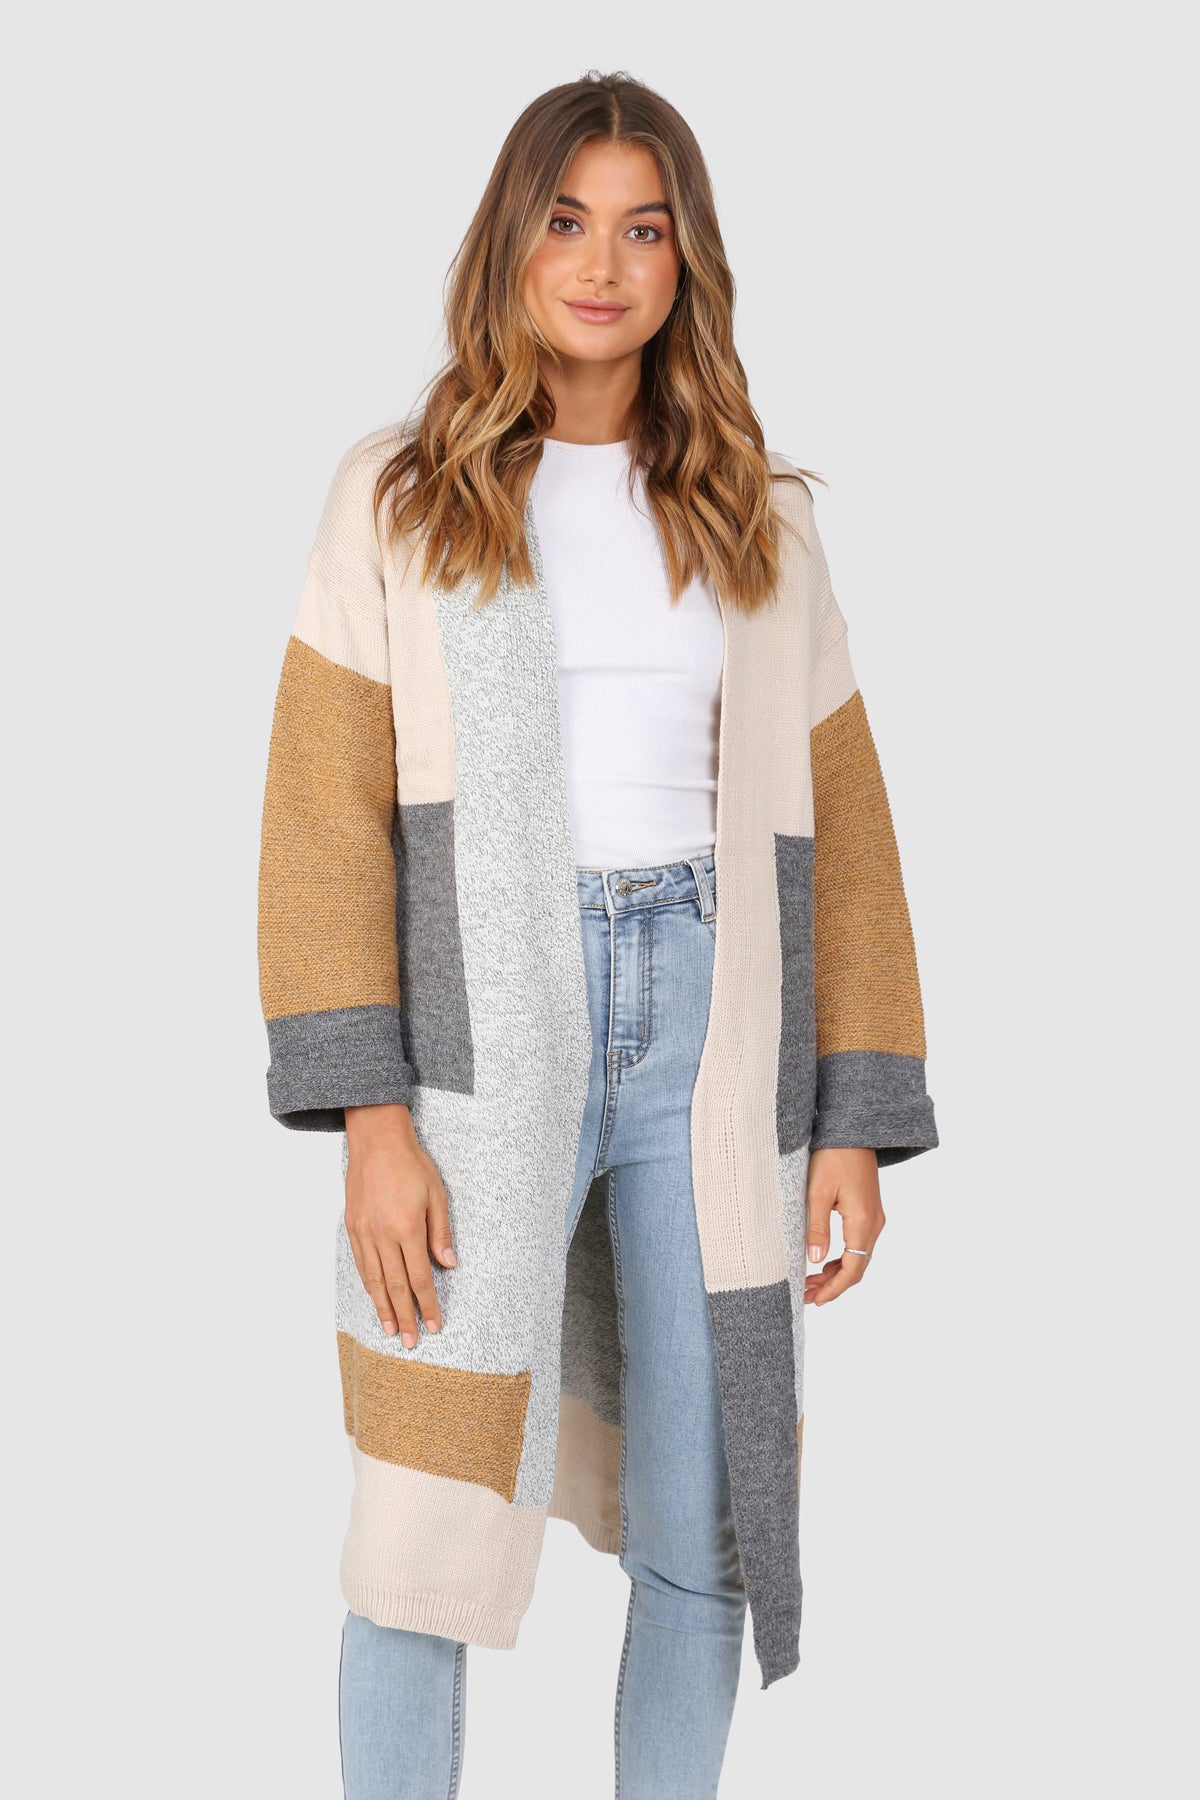 Bailage Caucasian female wearing Oversized Open Front  Multi-Color  Two Sided Pockets  Mid-Length  Relaxed Fit  Color Blocking Pattern  Ribbed Hemline and Details  Relaxed Fit  Casual Cardigan paired with a scoop neck white tee with high waisted light wash denim jeans and white sneakers